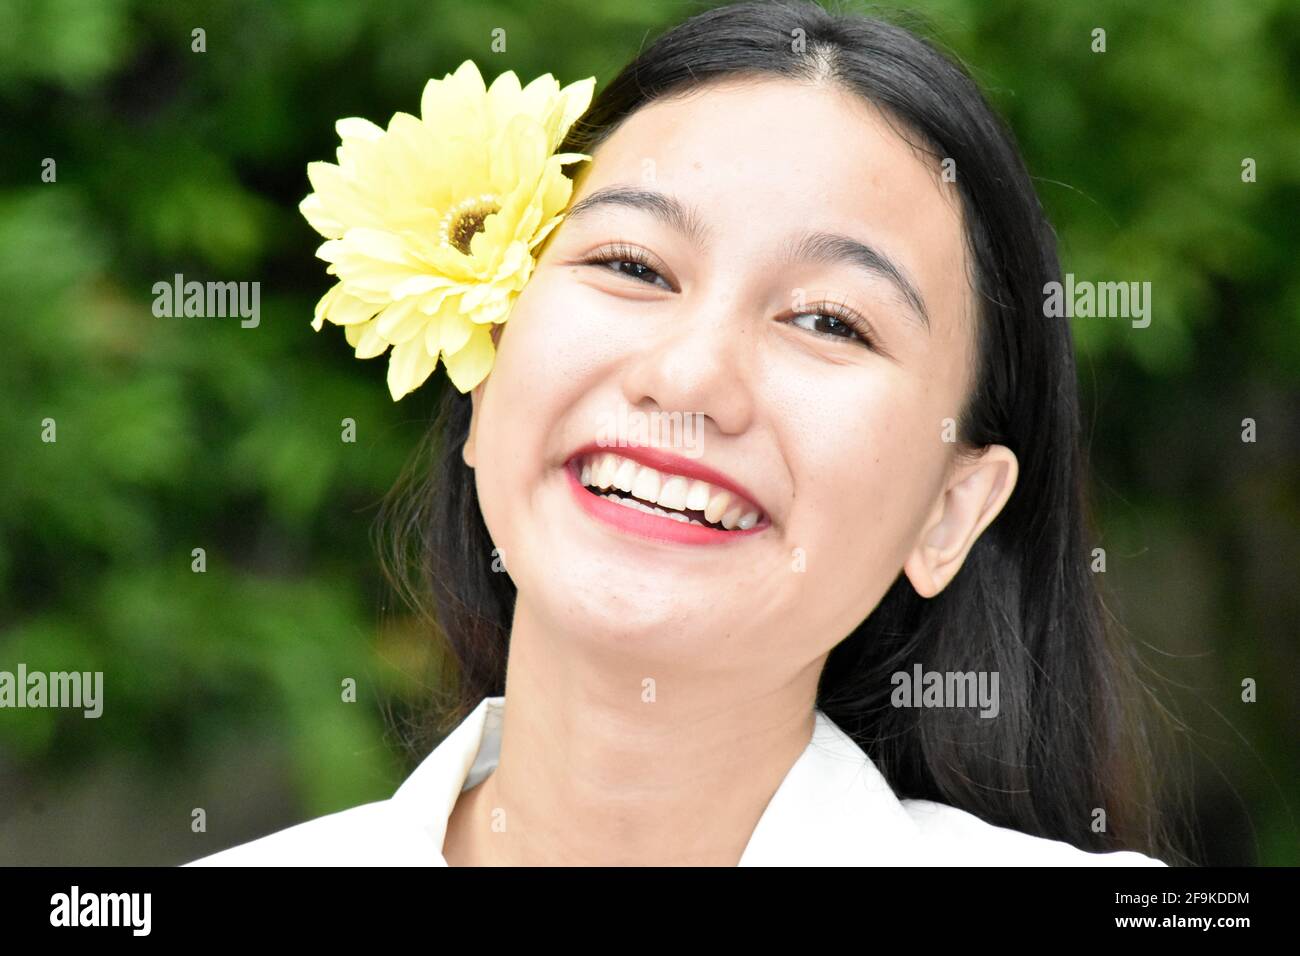 Smiling Youthful Diverse Female With Yellow Flower Stock Photo